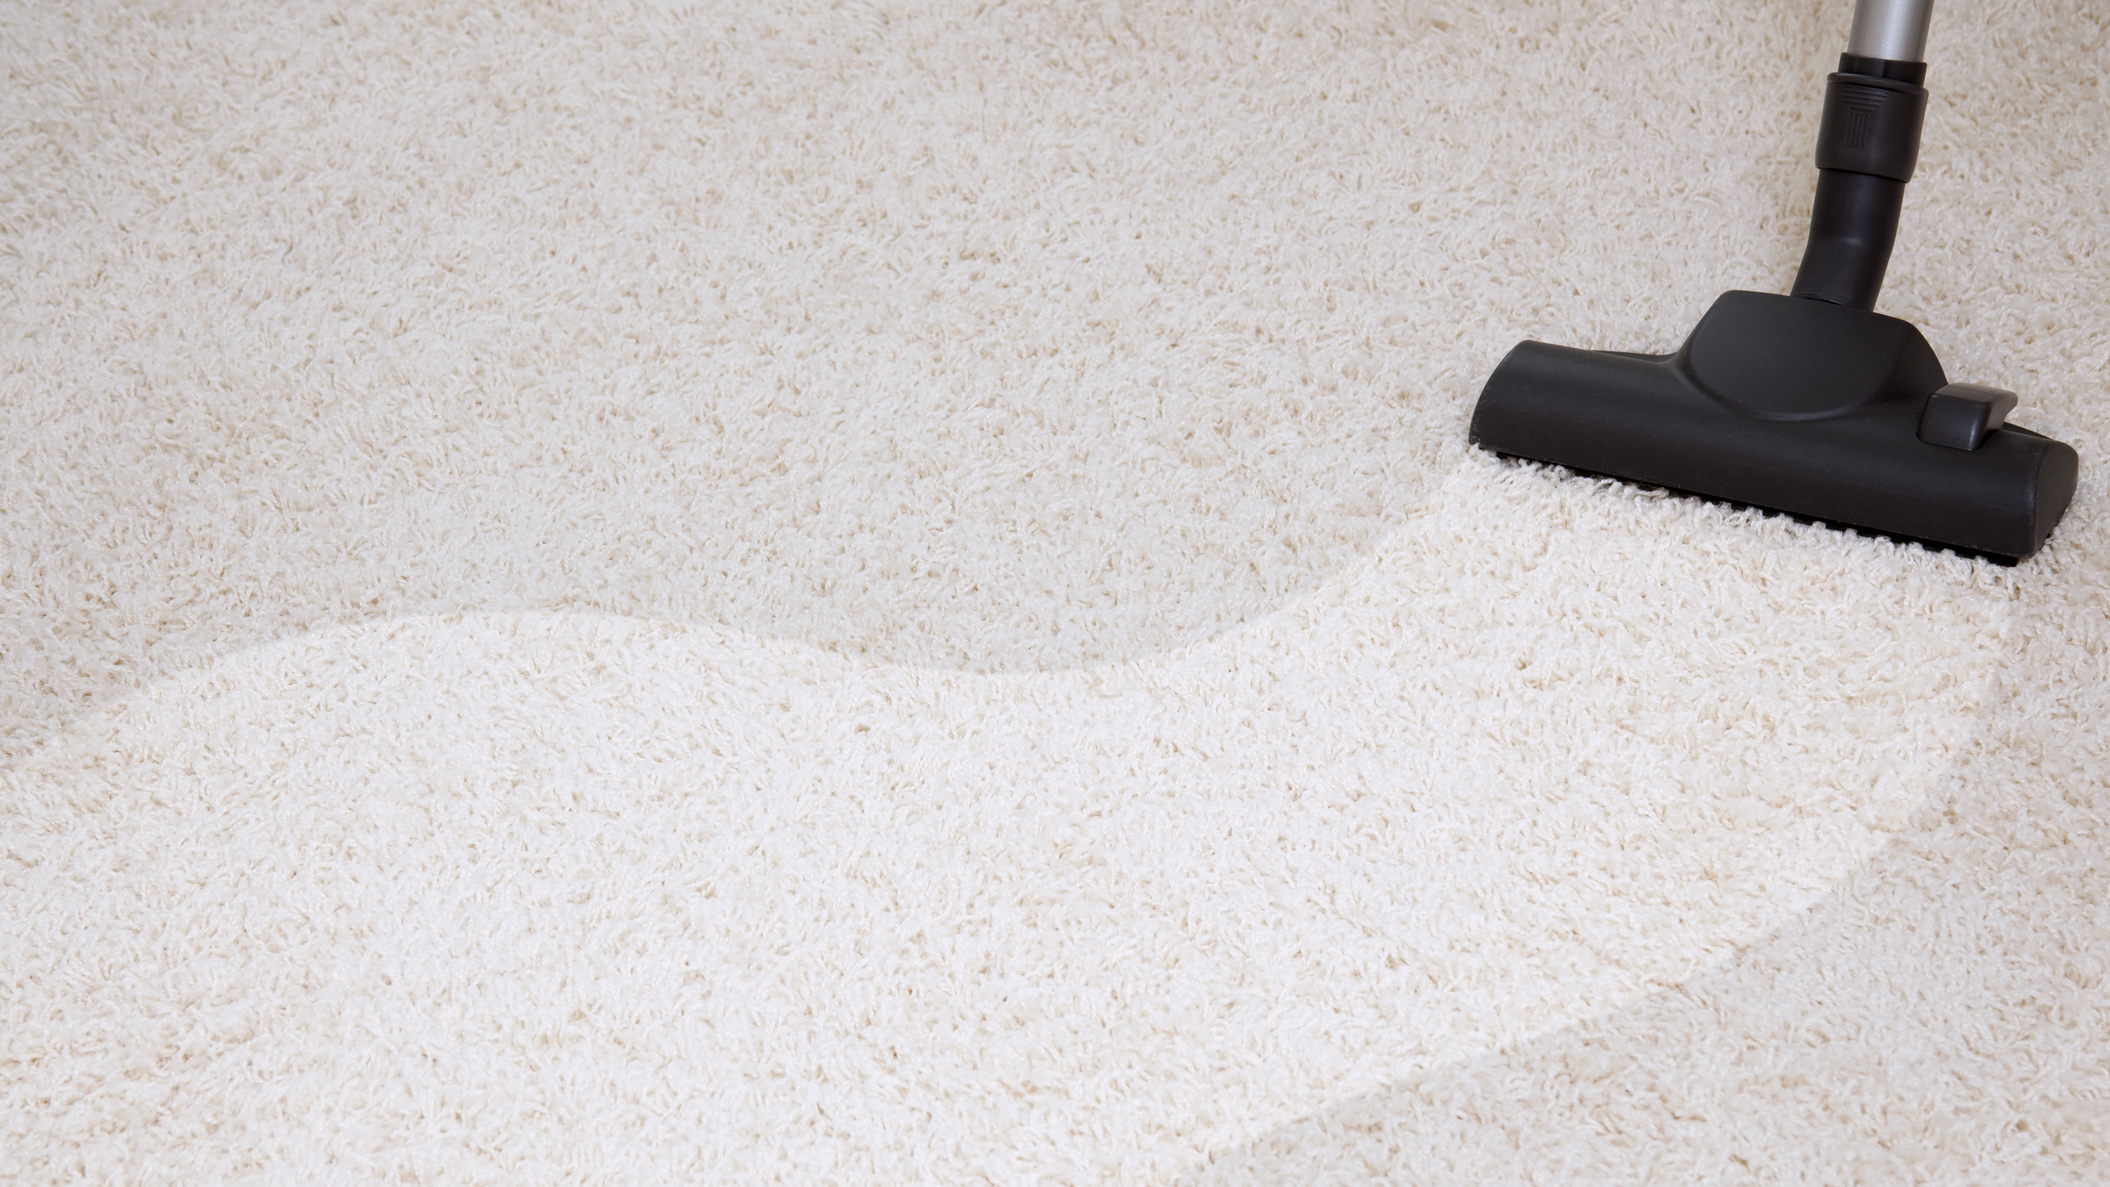 how to clean carpets: carpet cleaning machine